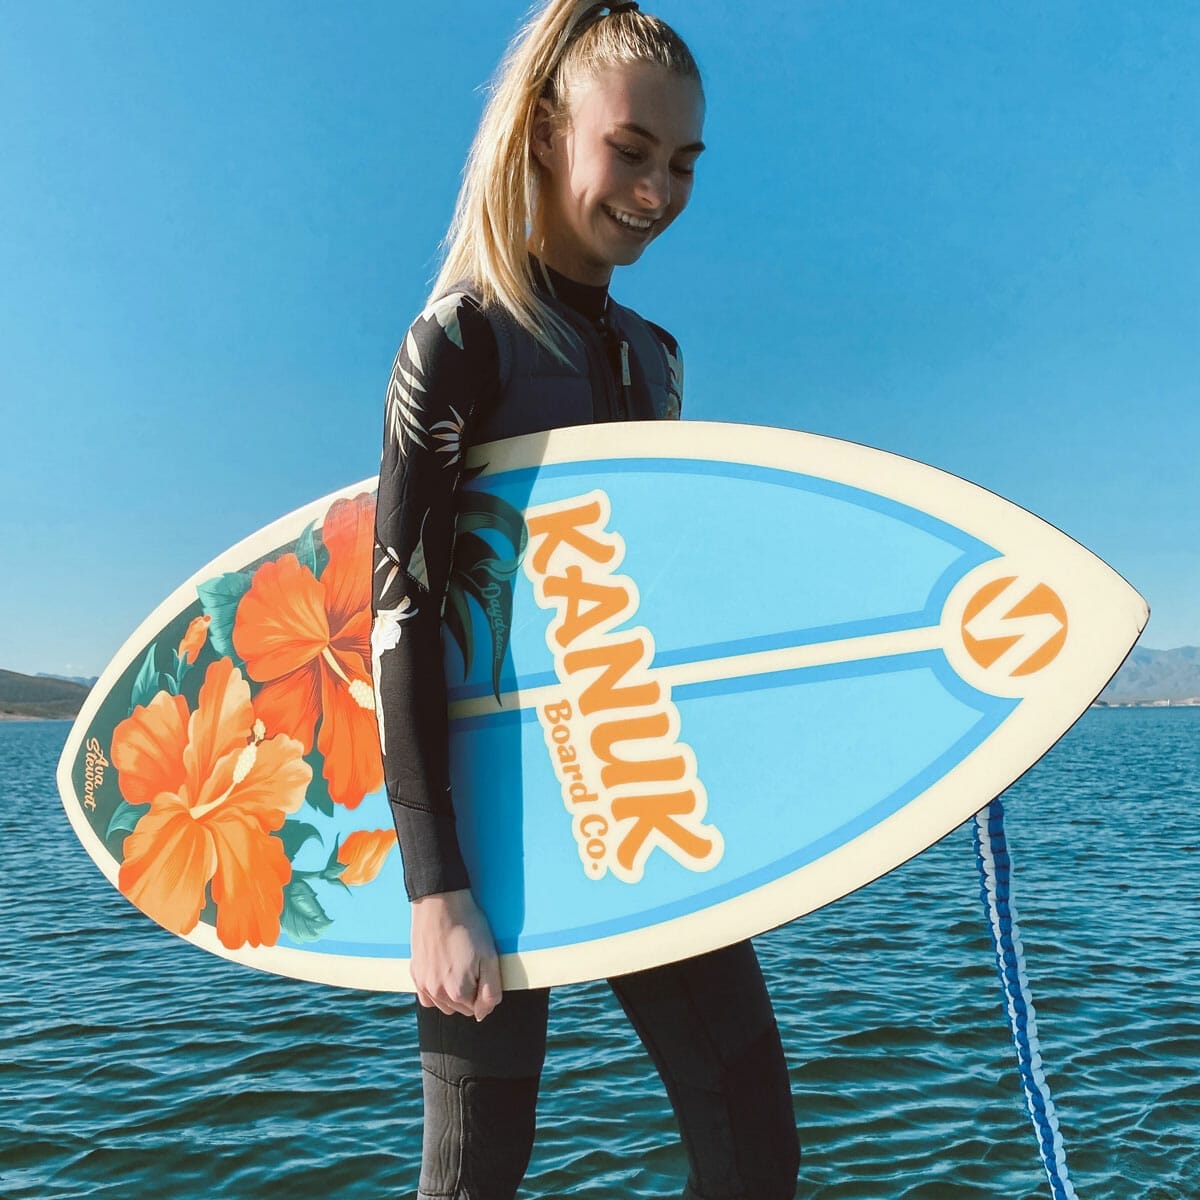 A woman standing on a wakesurf board.